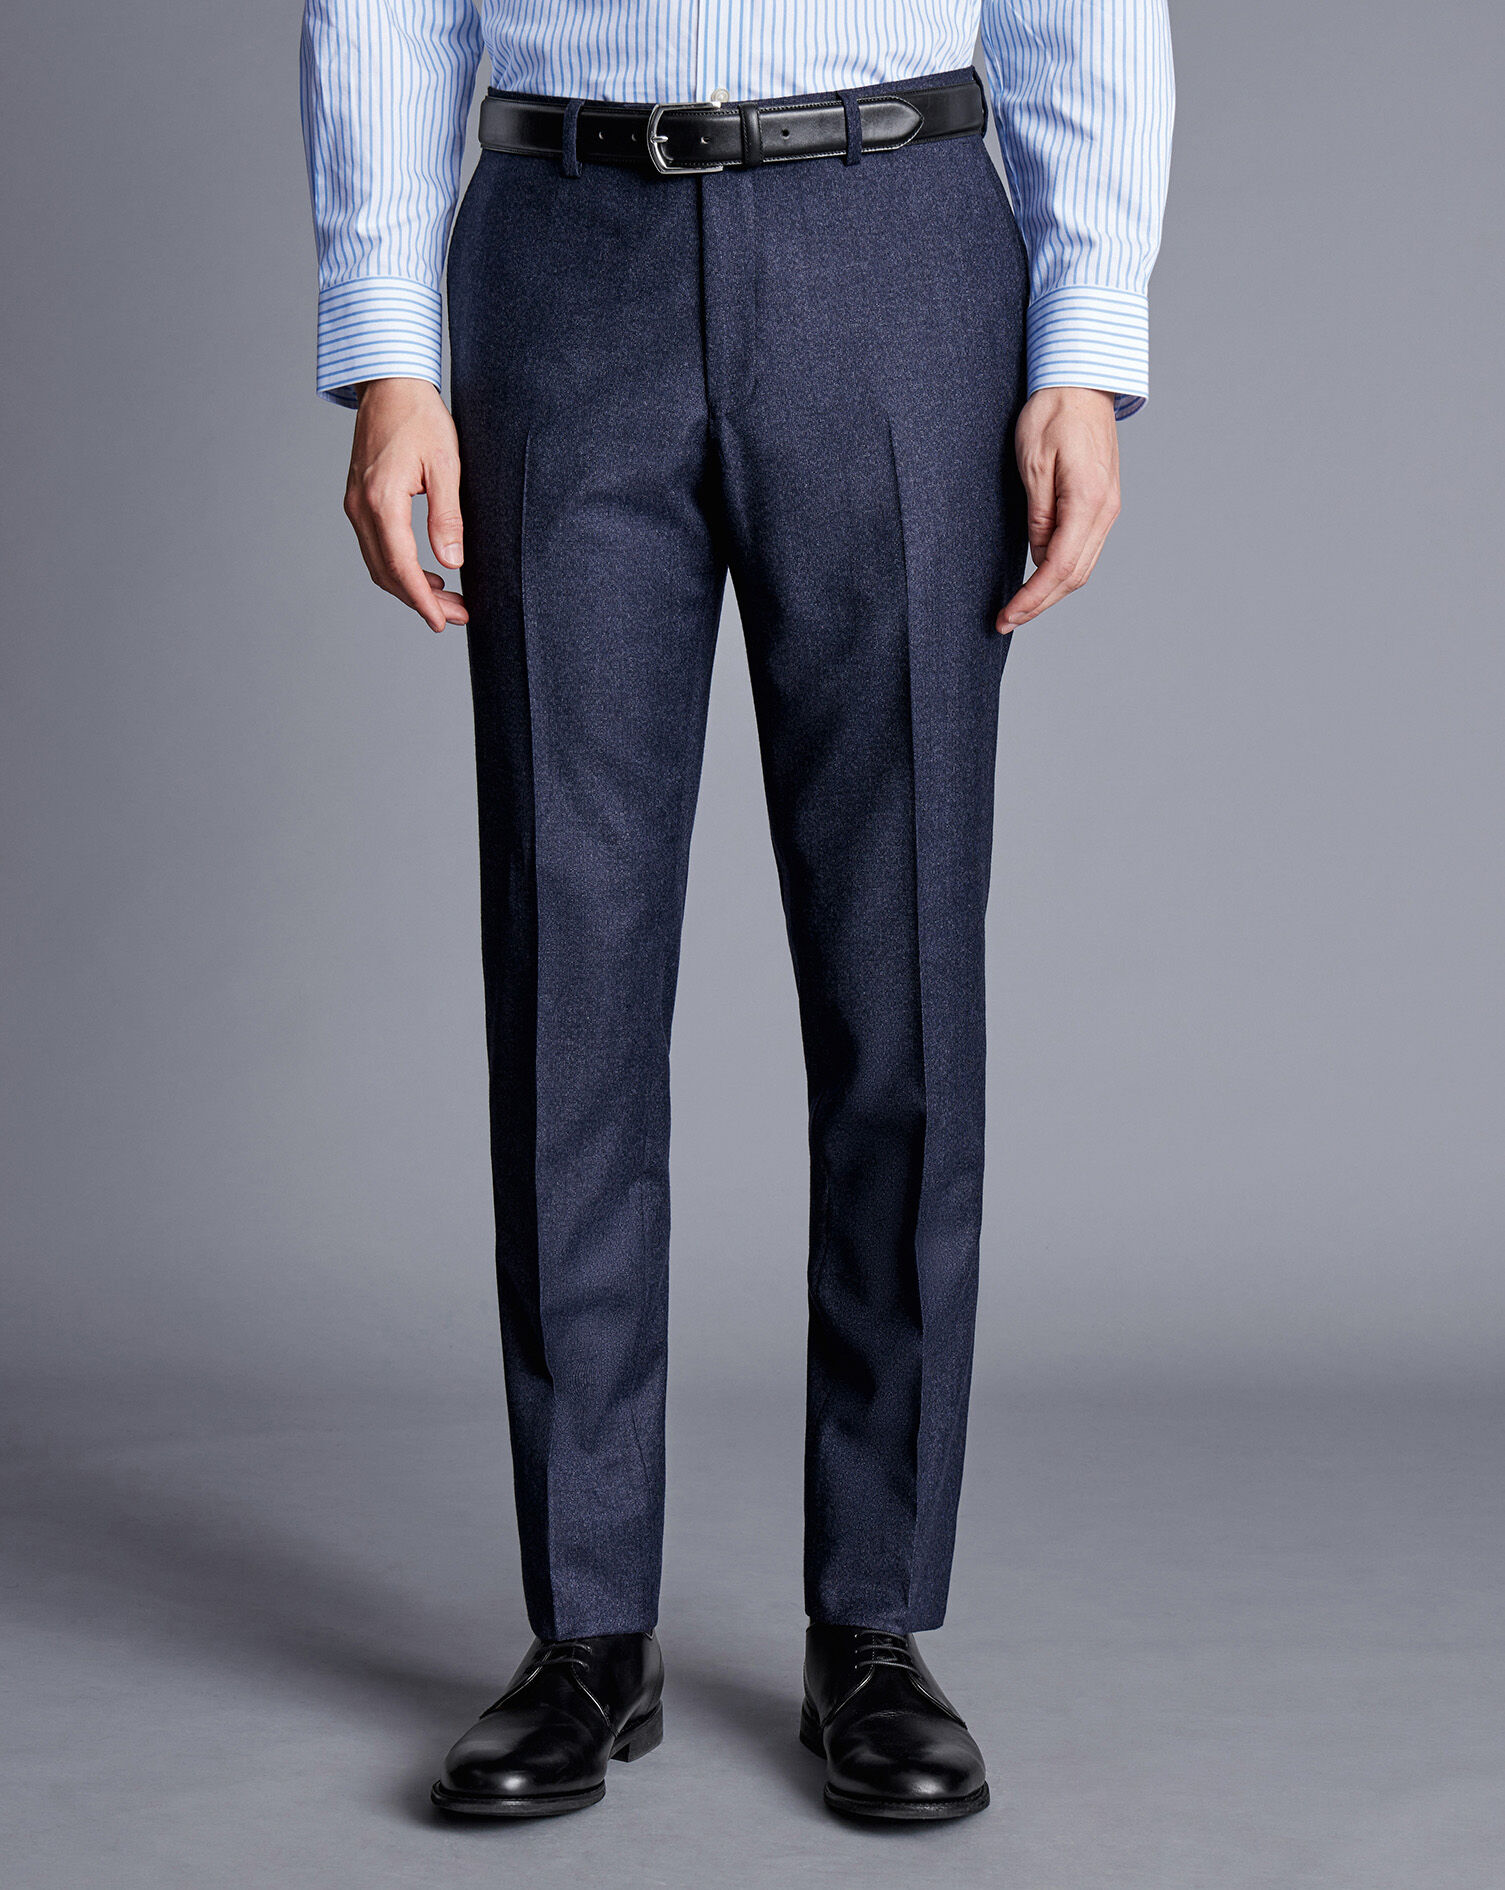 Men's trousers - CHARLES TYRWHITE - Second hand | DressYou